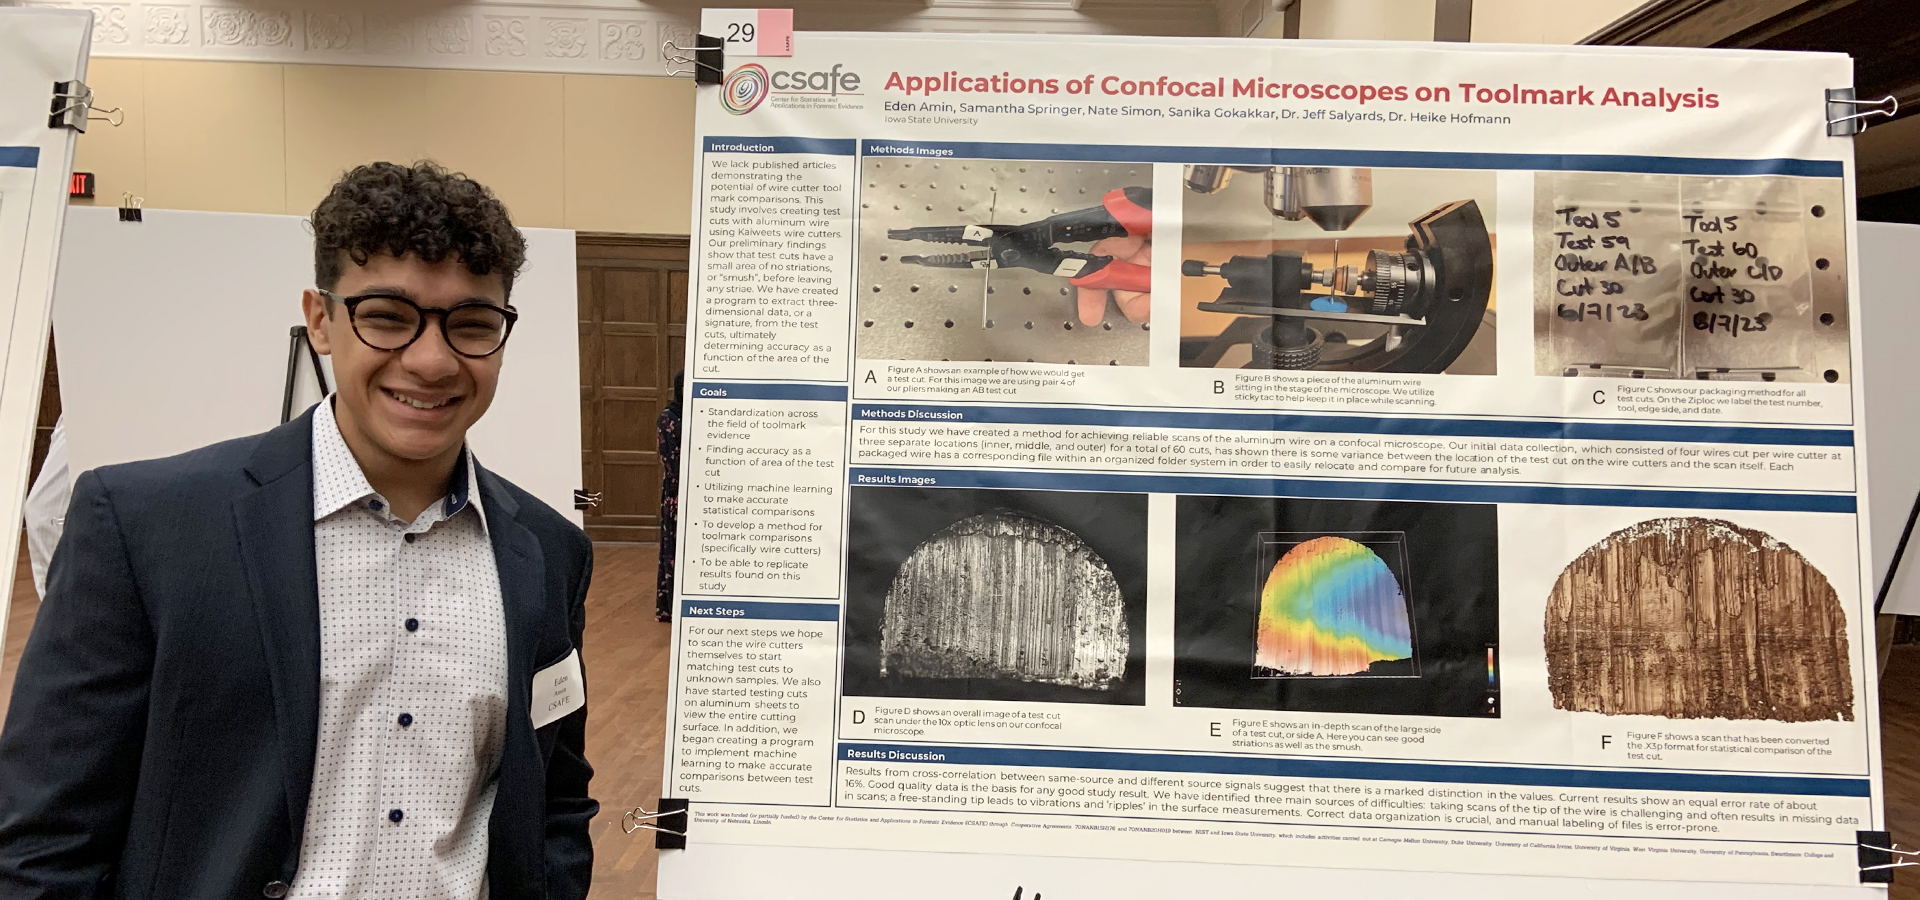 Eden Amin presented his research project on developing a method for toolmark comparisons.